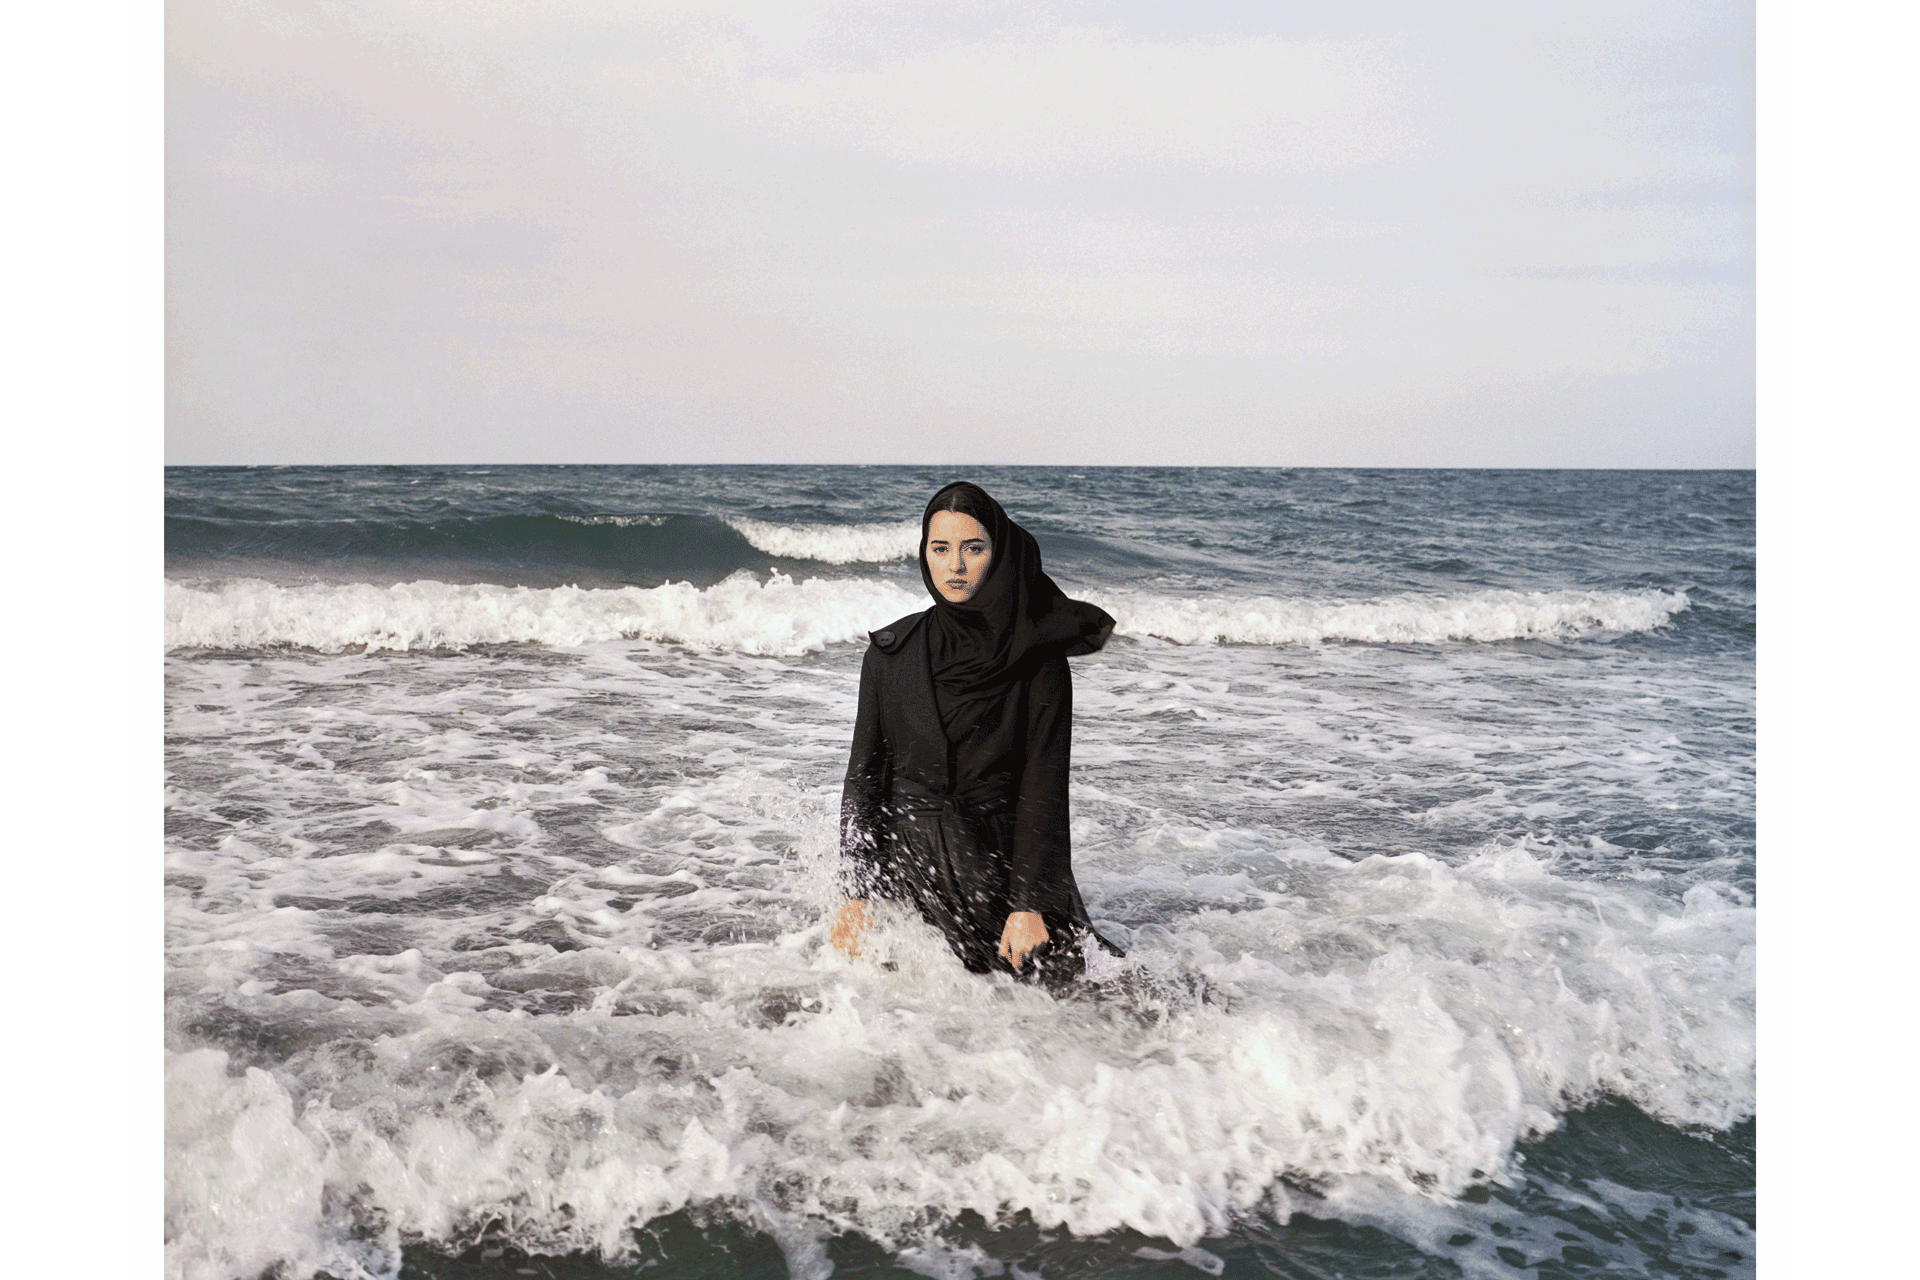 Woman stands in the sea, staring directly at the camera, with her legs submerged and waves behind her.